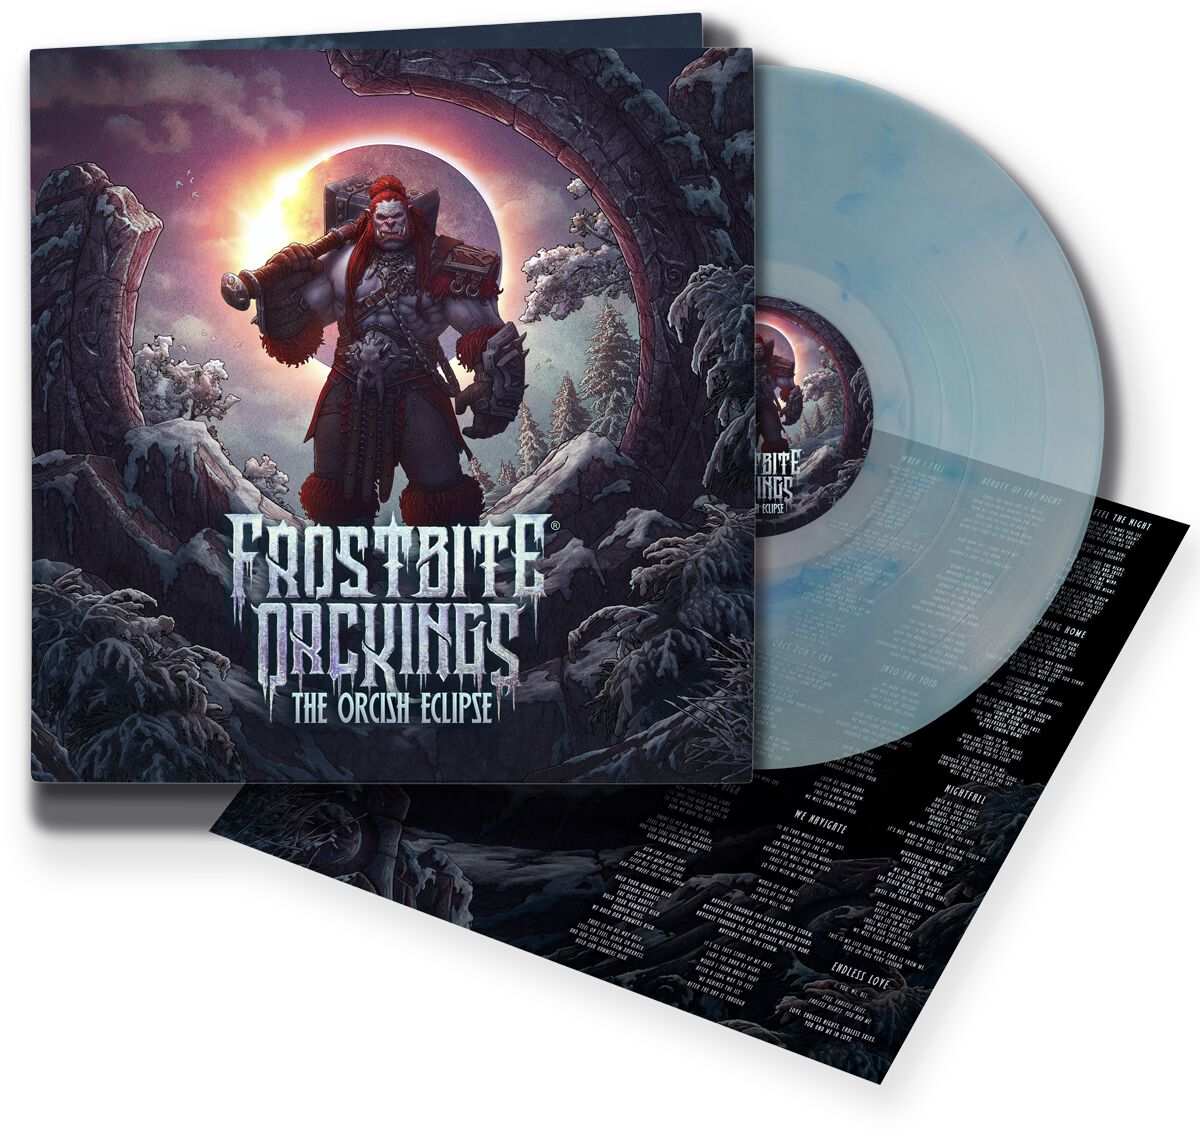 Frostbite Orckings The Orcish Eclipse LP multicolor von Frostbite Orckings